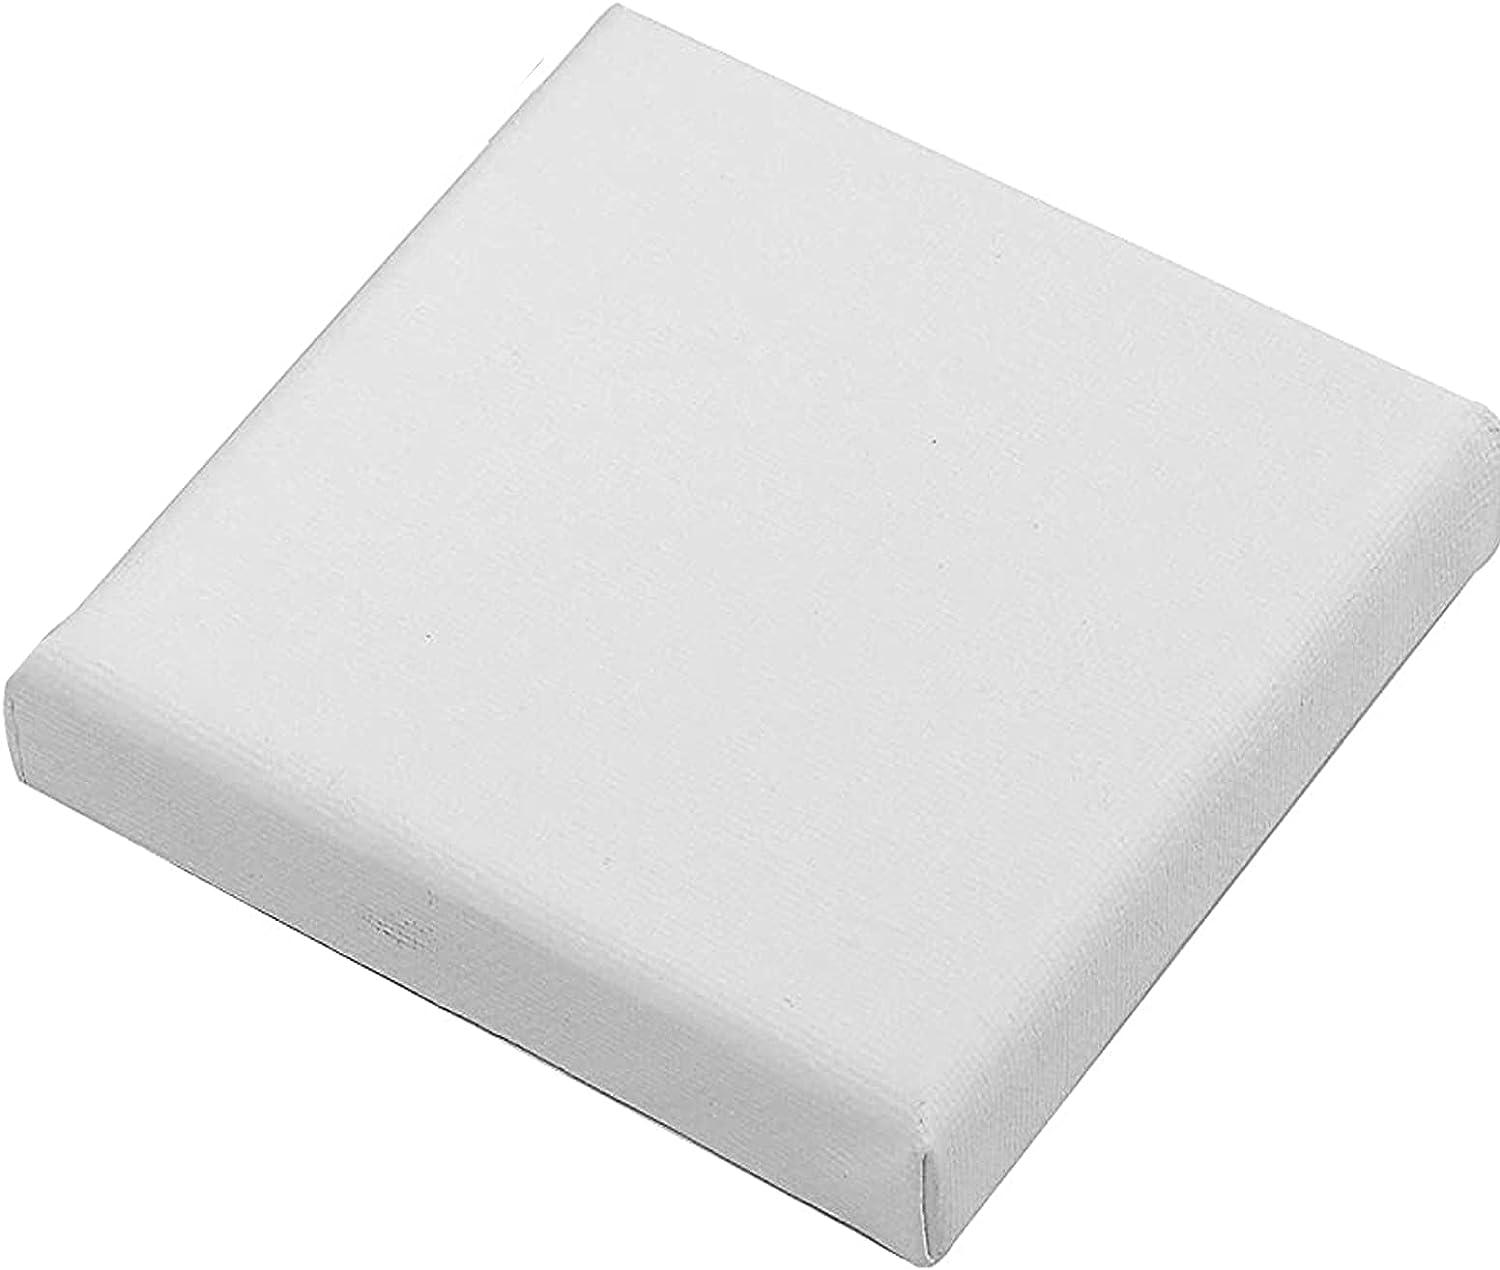 SL crafts Mini Stretched Canvas 3.5X2.75 (1 Pack of 12 Mini Canvases)